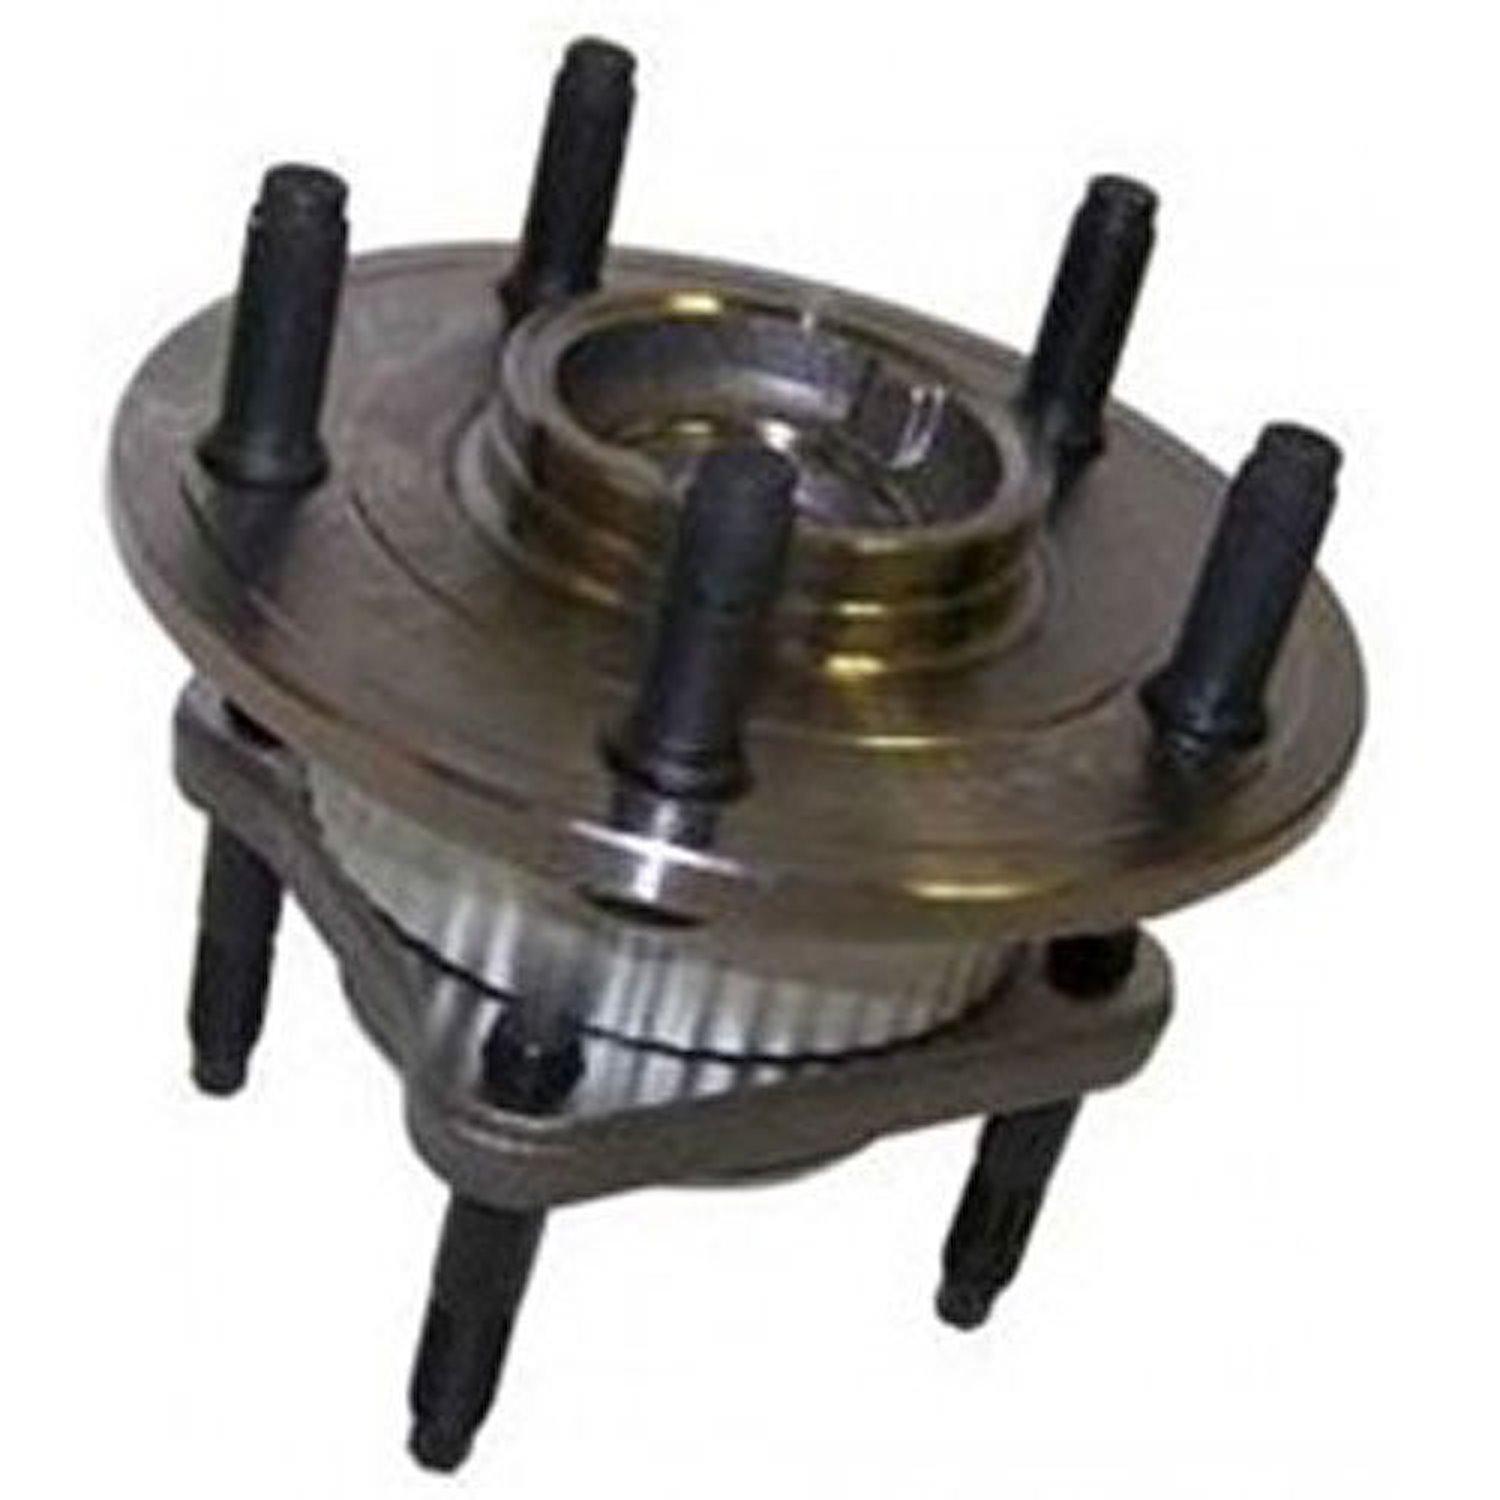 This rear axle hub assembly from Omix-ADA fits 05-10 Jeep Grand Cherokee WK .